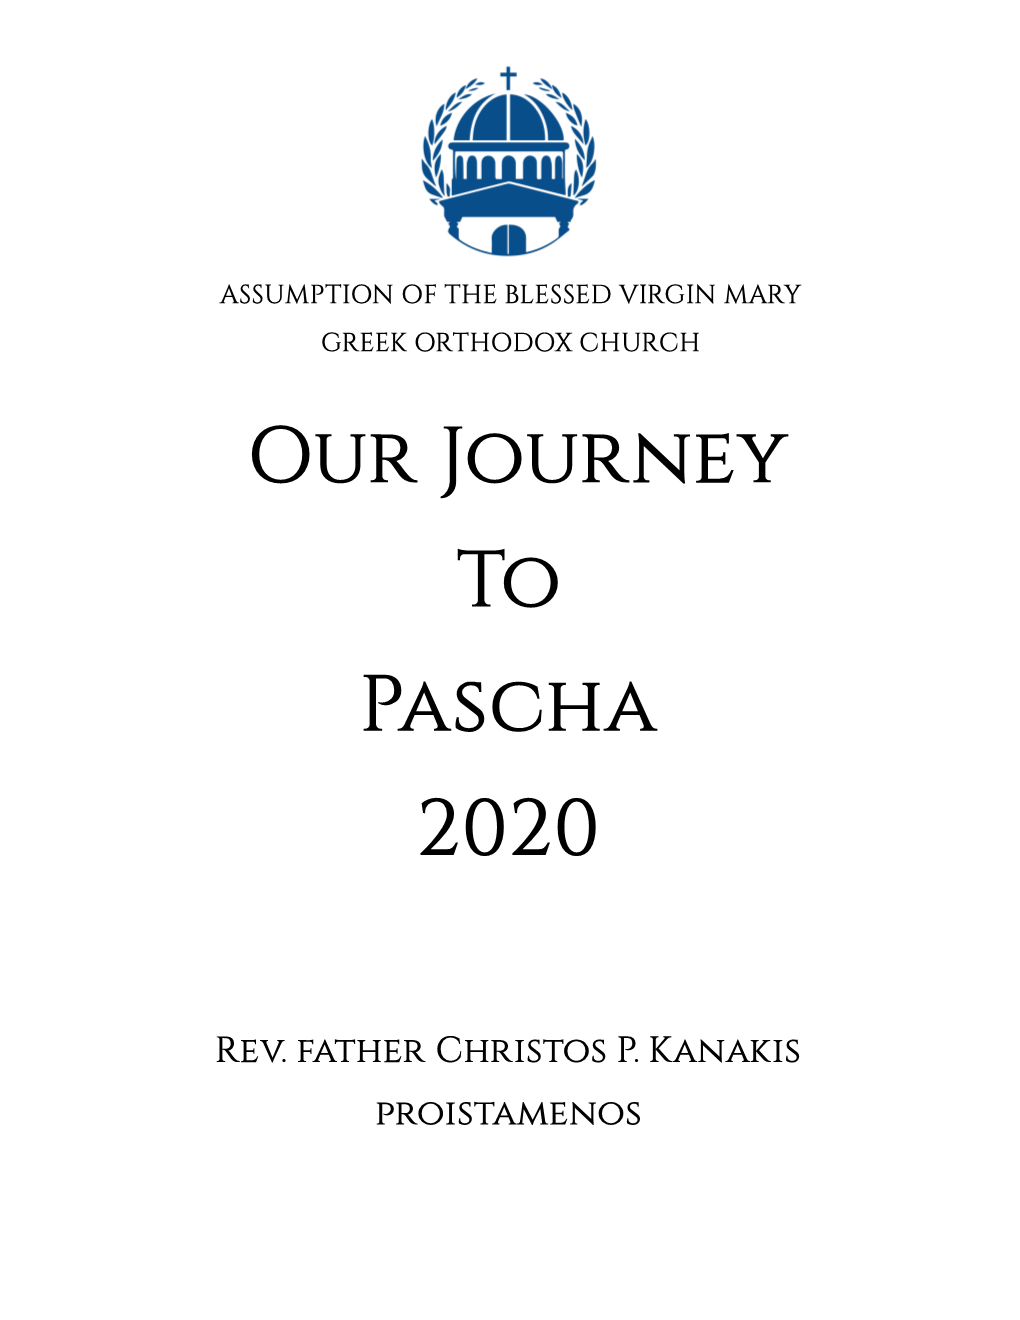 Our Journey to Pascha 2020